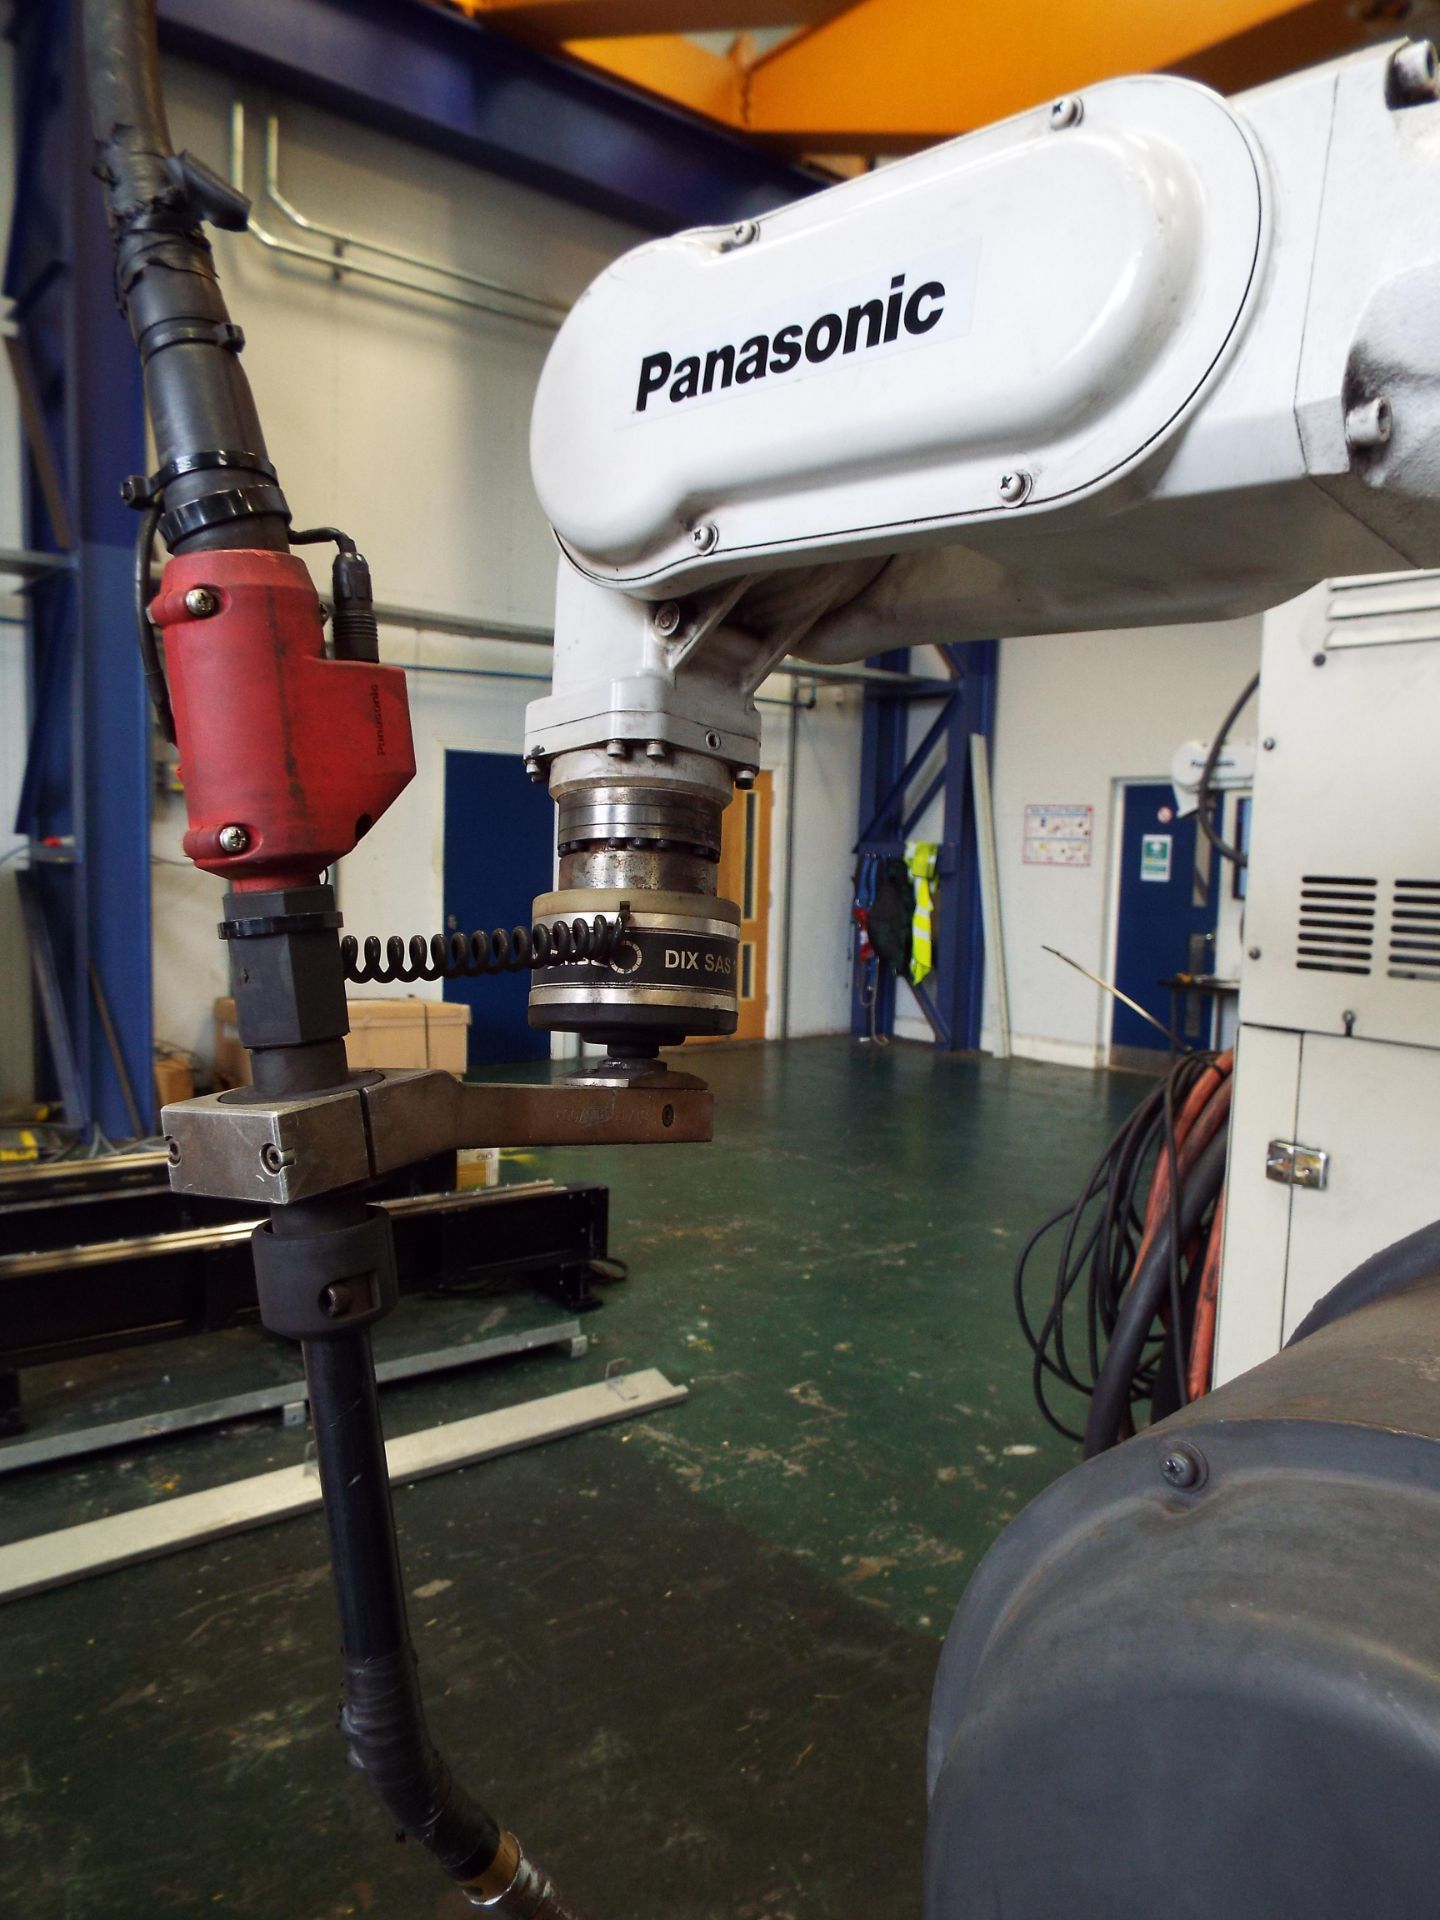 Panasonic TA1800 MIG Welding Robot cw Power Source,Transformer & 7th Axis Rotating Positioner - Image 9 of 12